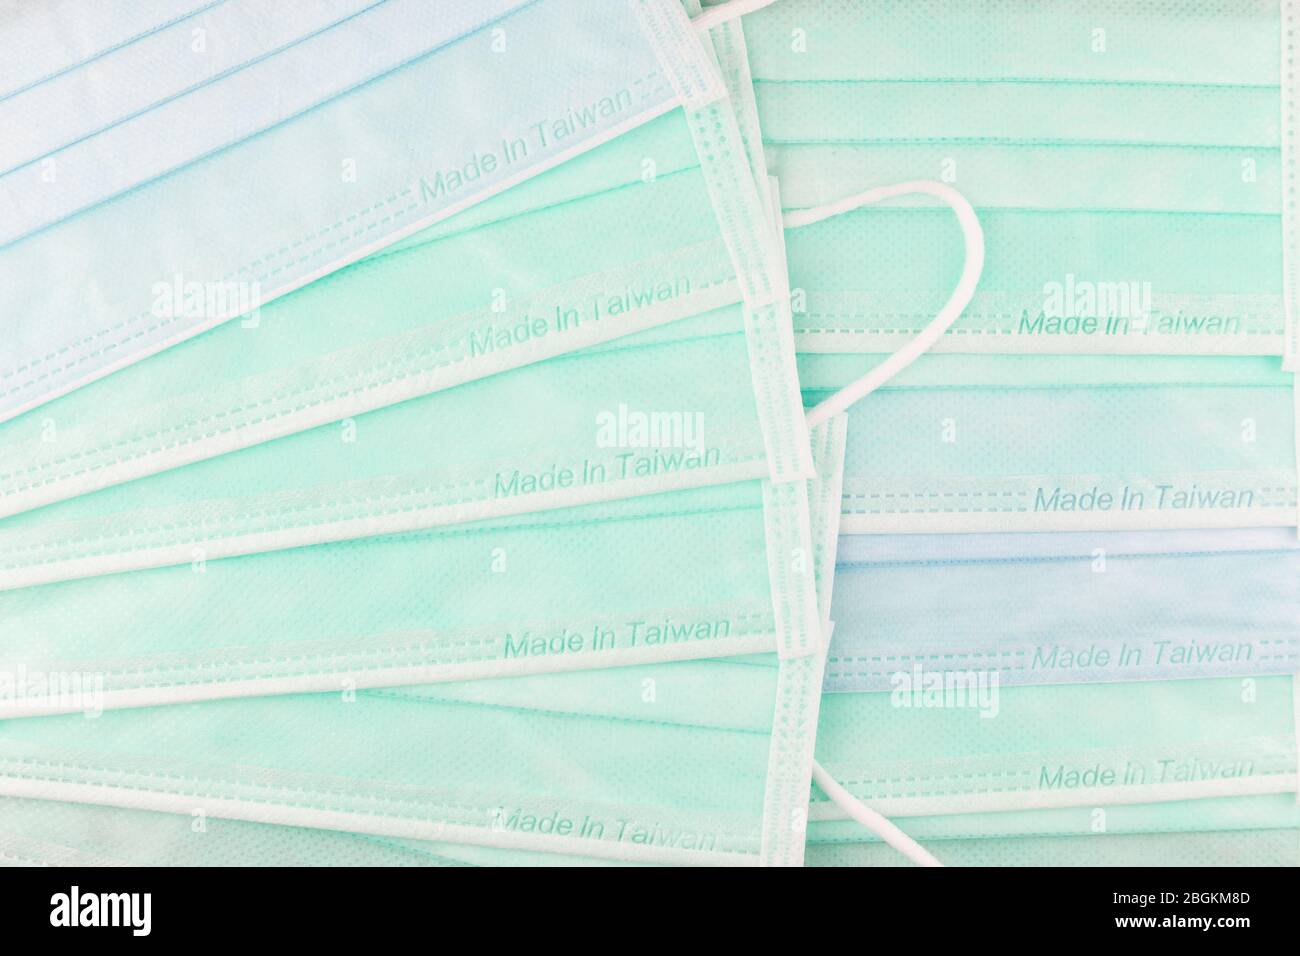 Made in Taiwan surgical masks for protection against the Covid-19 coronavirus pandemic. Stock Photo